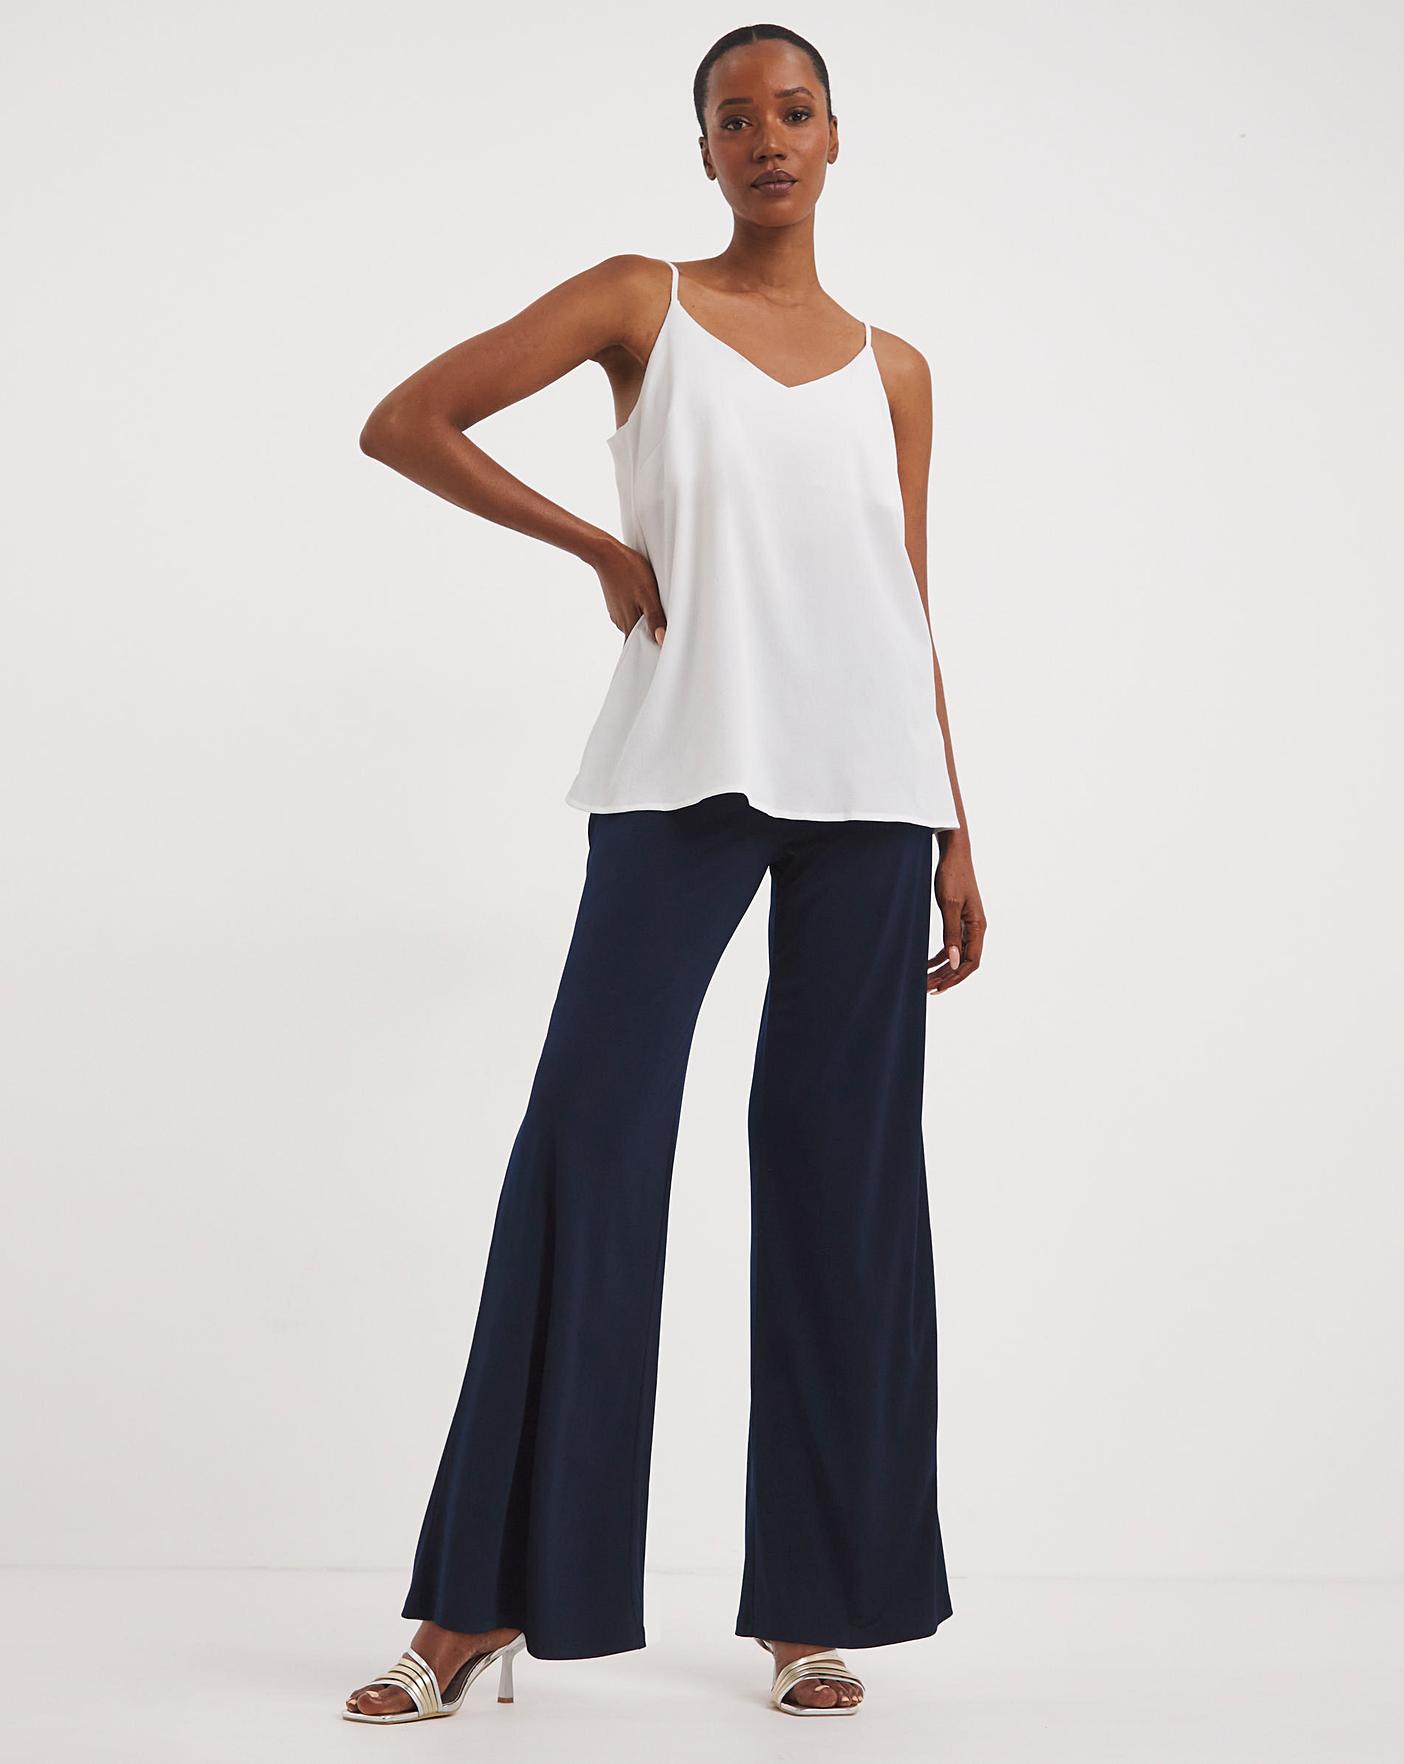 Navy High Waist Fitted Palazzo Pants